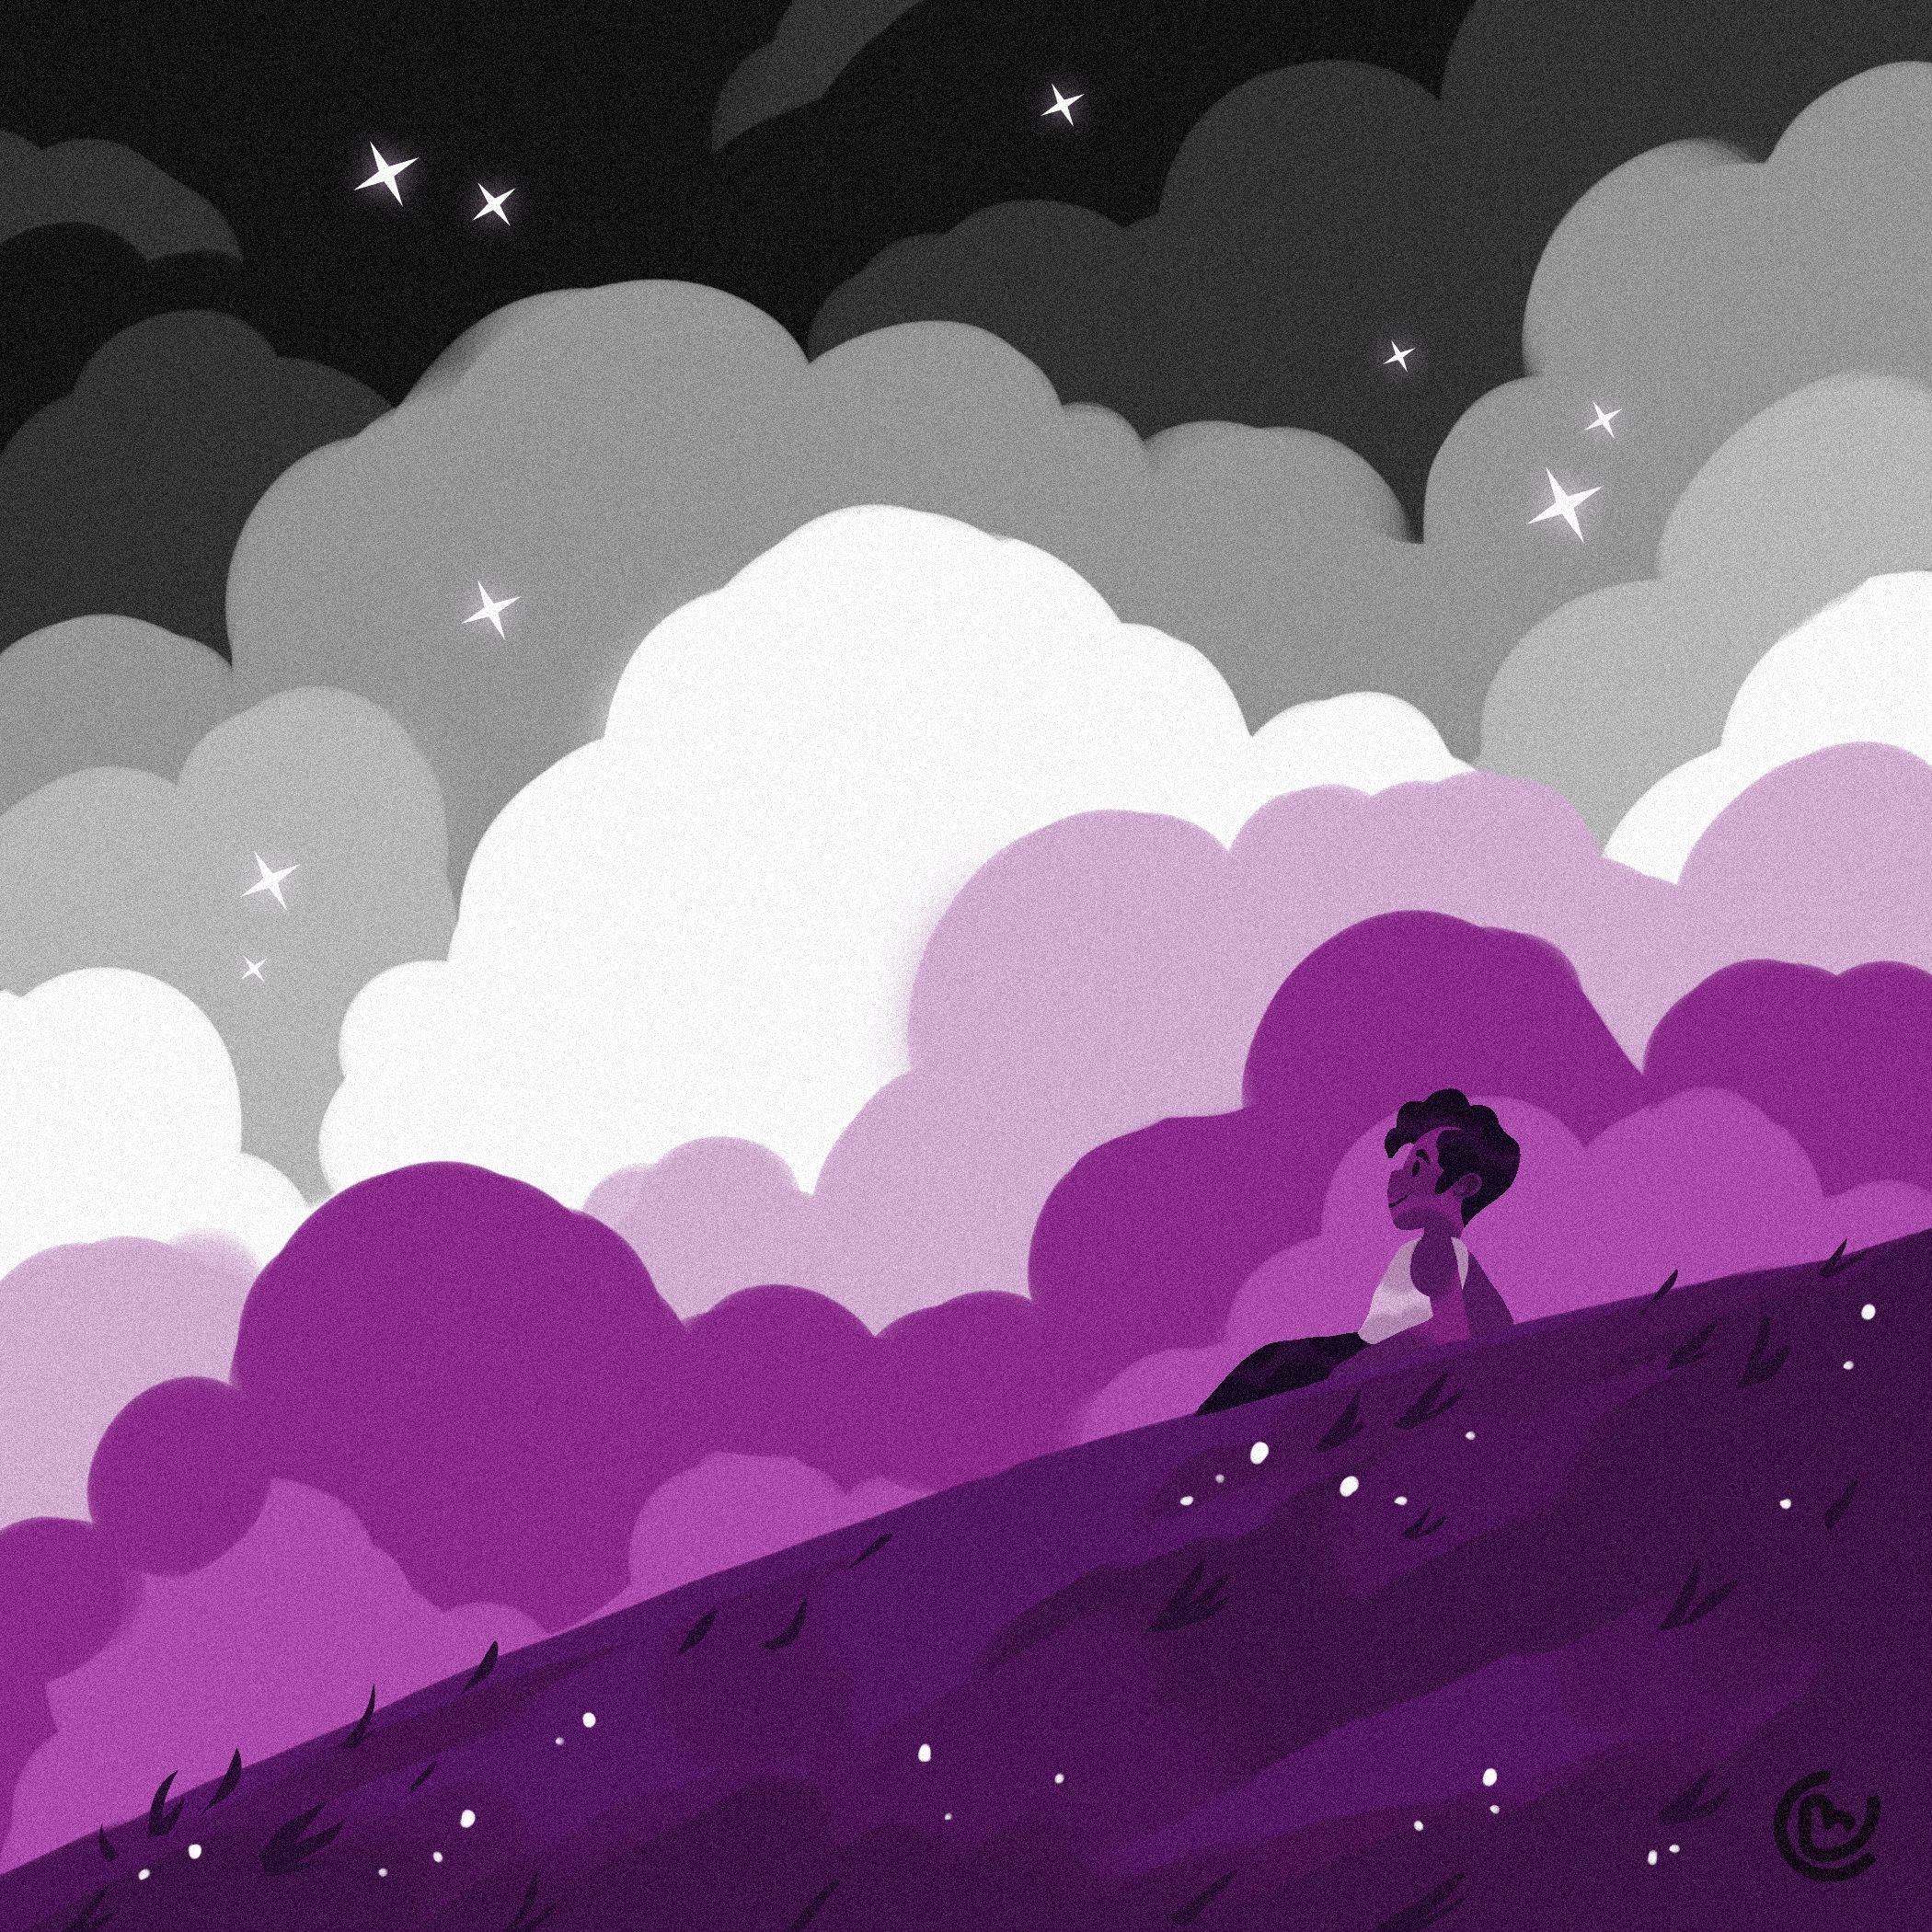 I painted the asexual sky